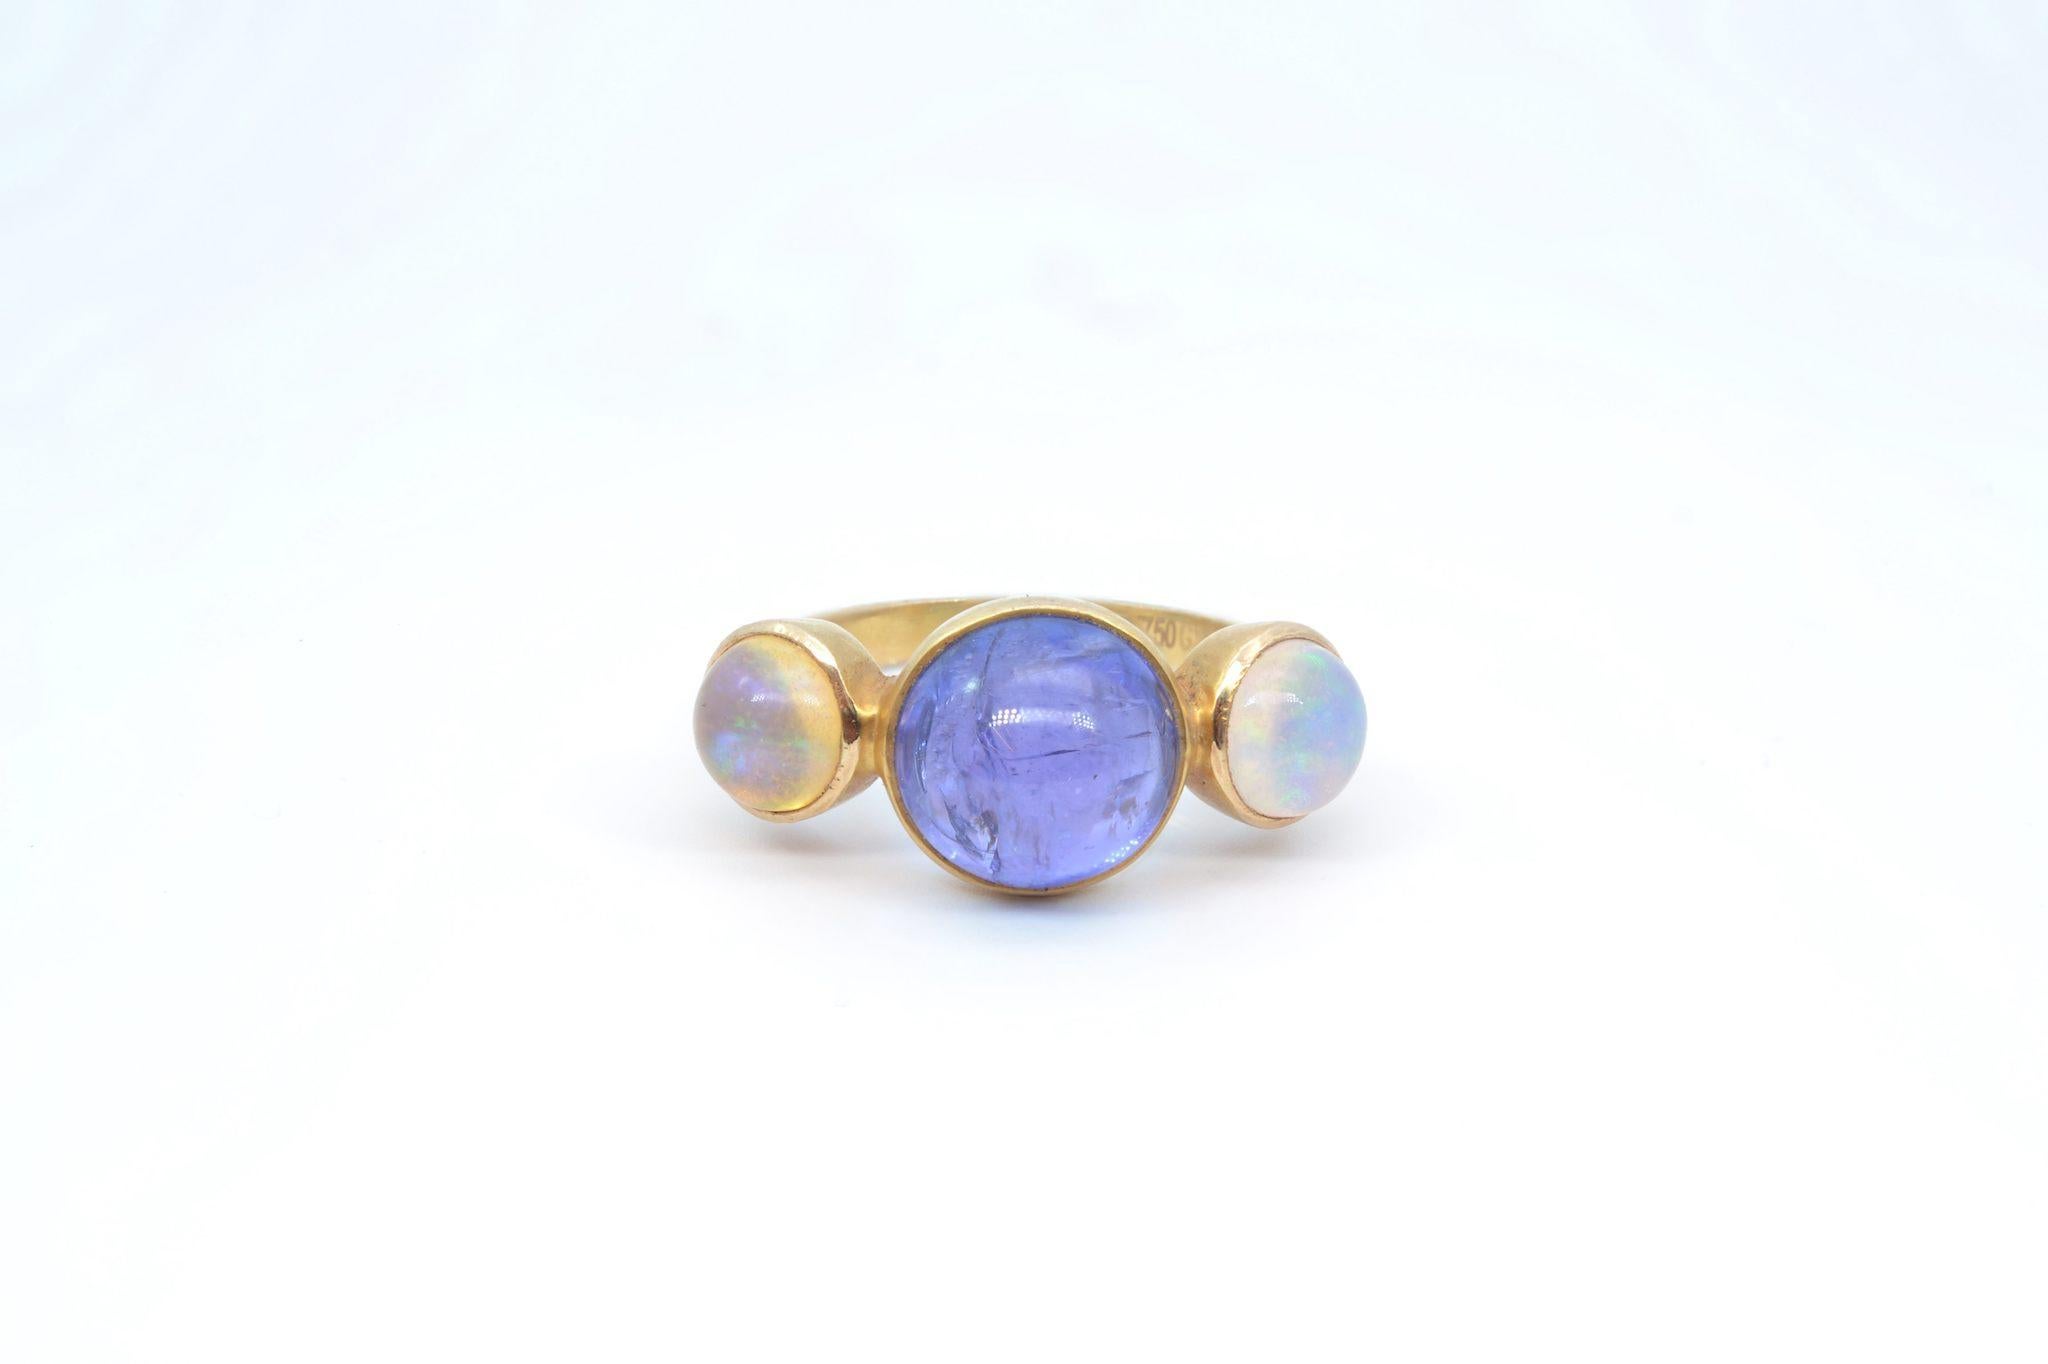 Stones: 1 tanzanite cabochon of 2cts, 2 opals: 1.40ct
Material: Yellow gold
Weight: 4.2g
Period: Recent
Size: 54 (free sizing)
Certificate
Ref. : 25115